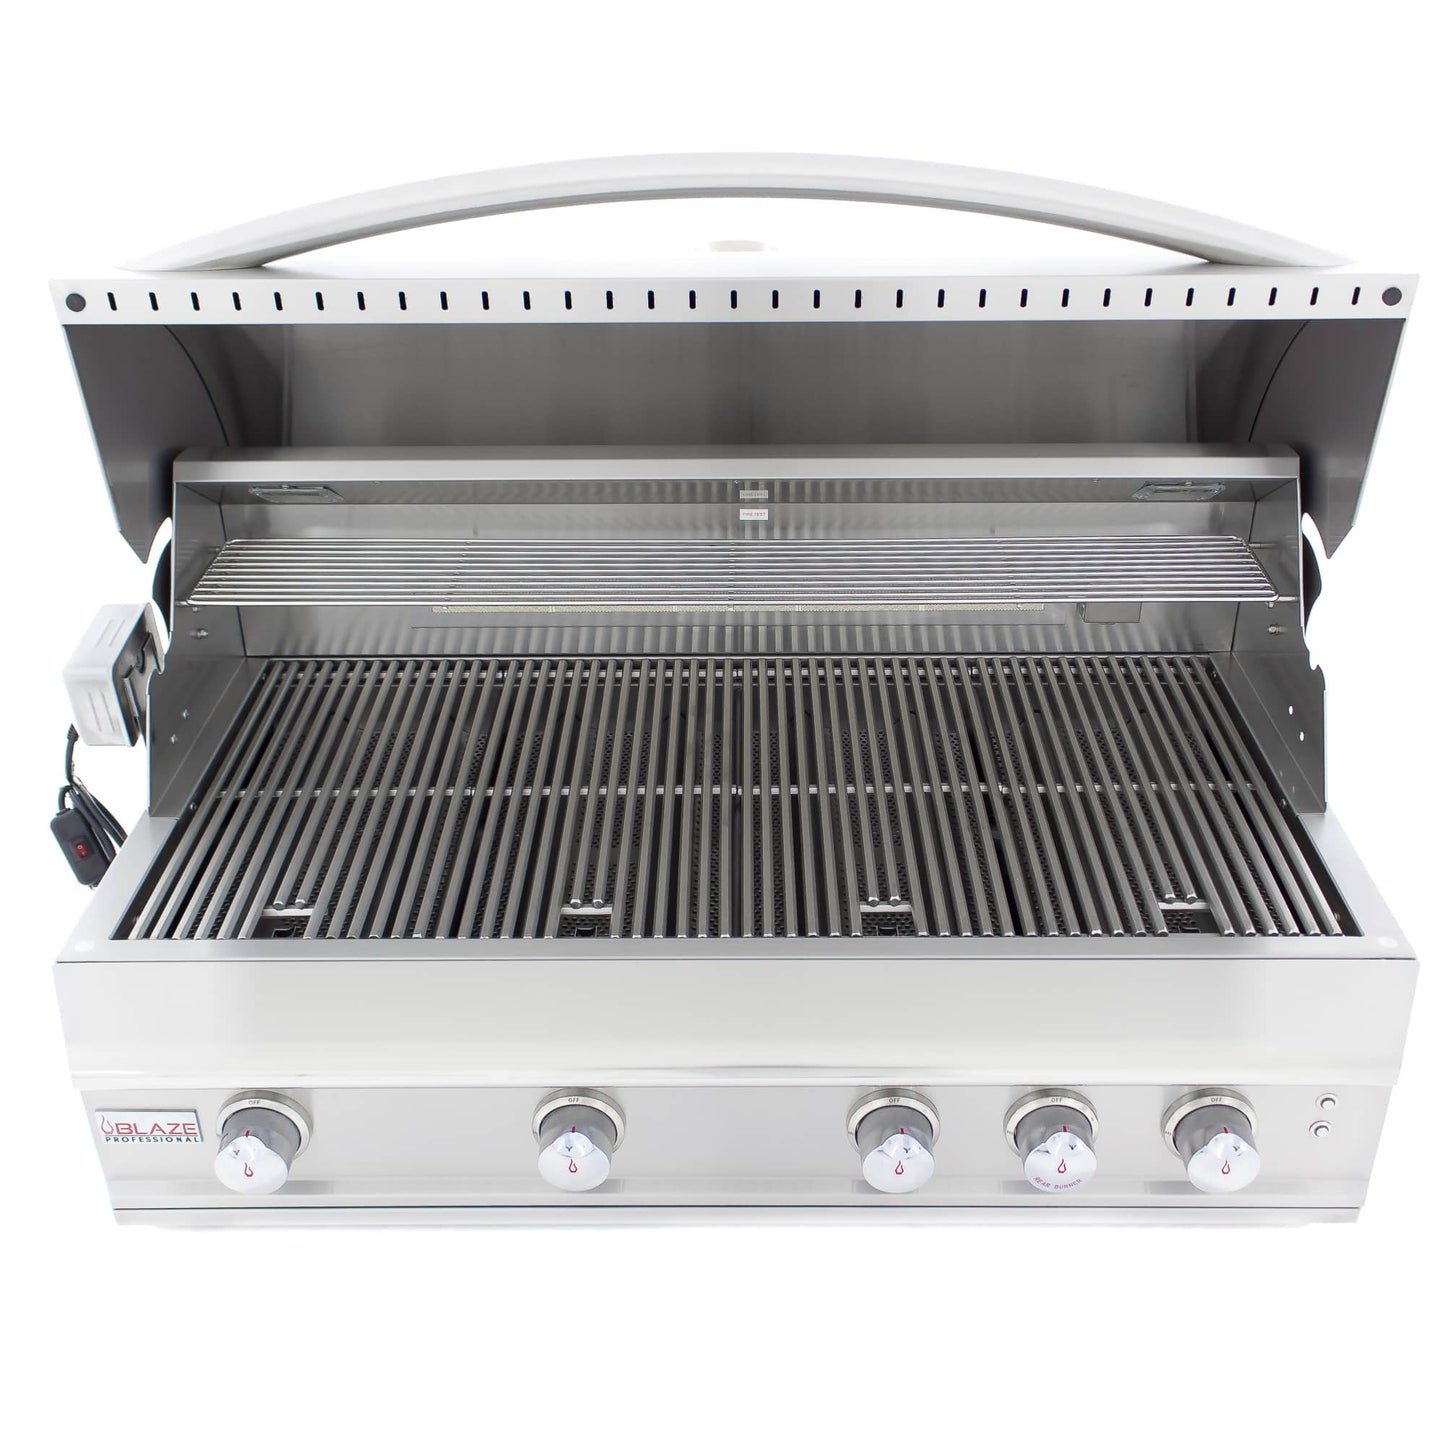 Blaze Professional LUX 44" 4-Burner Gas Grill With Rear Infrared Burners